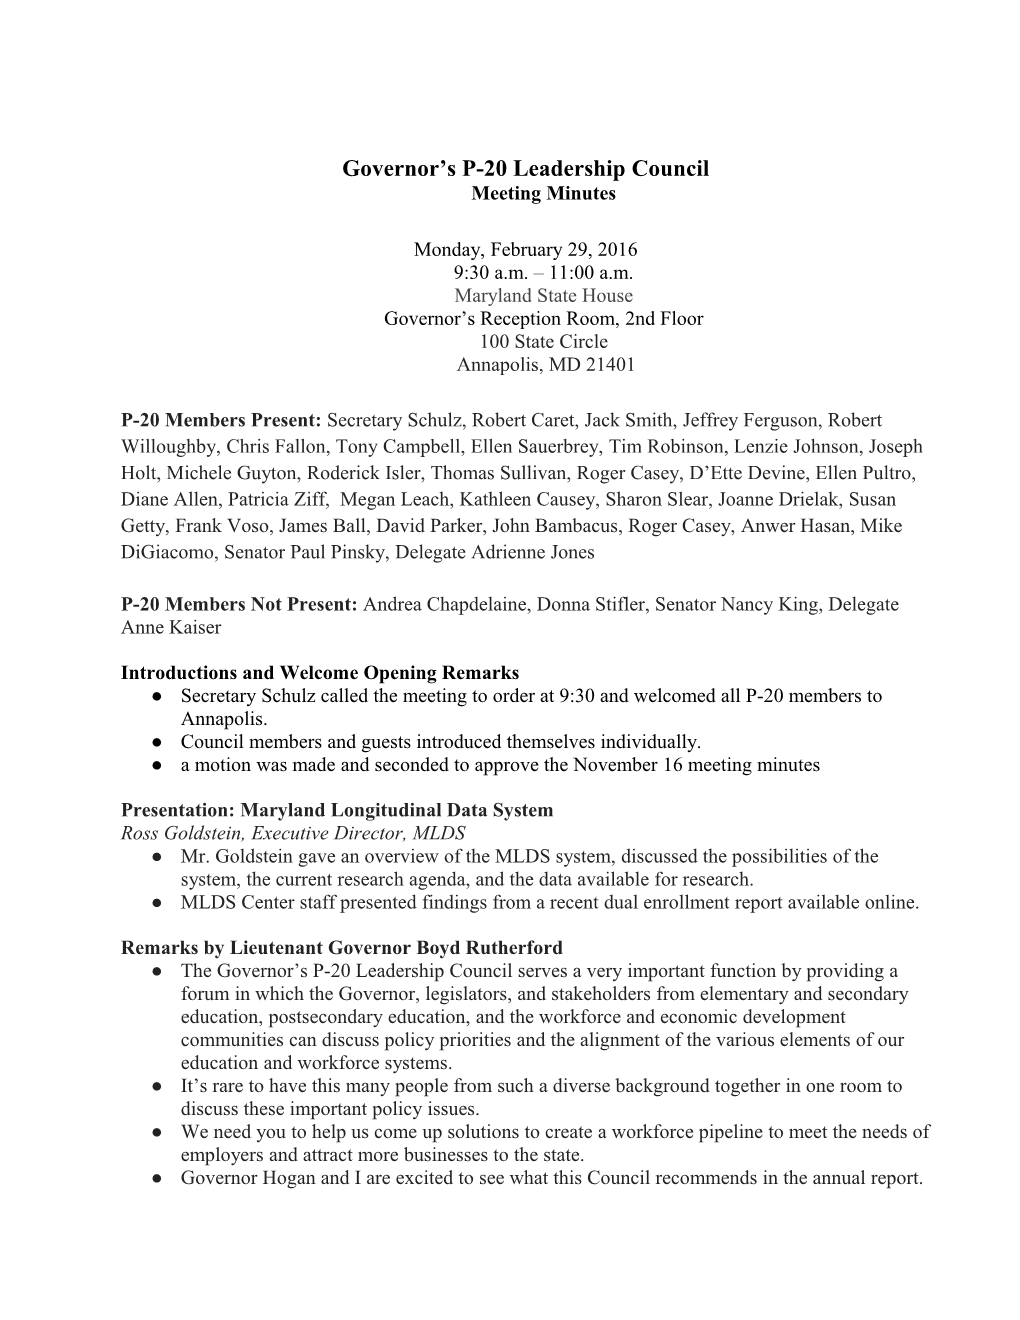 Governor S P-20 Leadership Councilmeeting Minutes